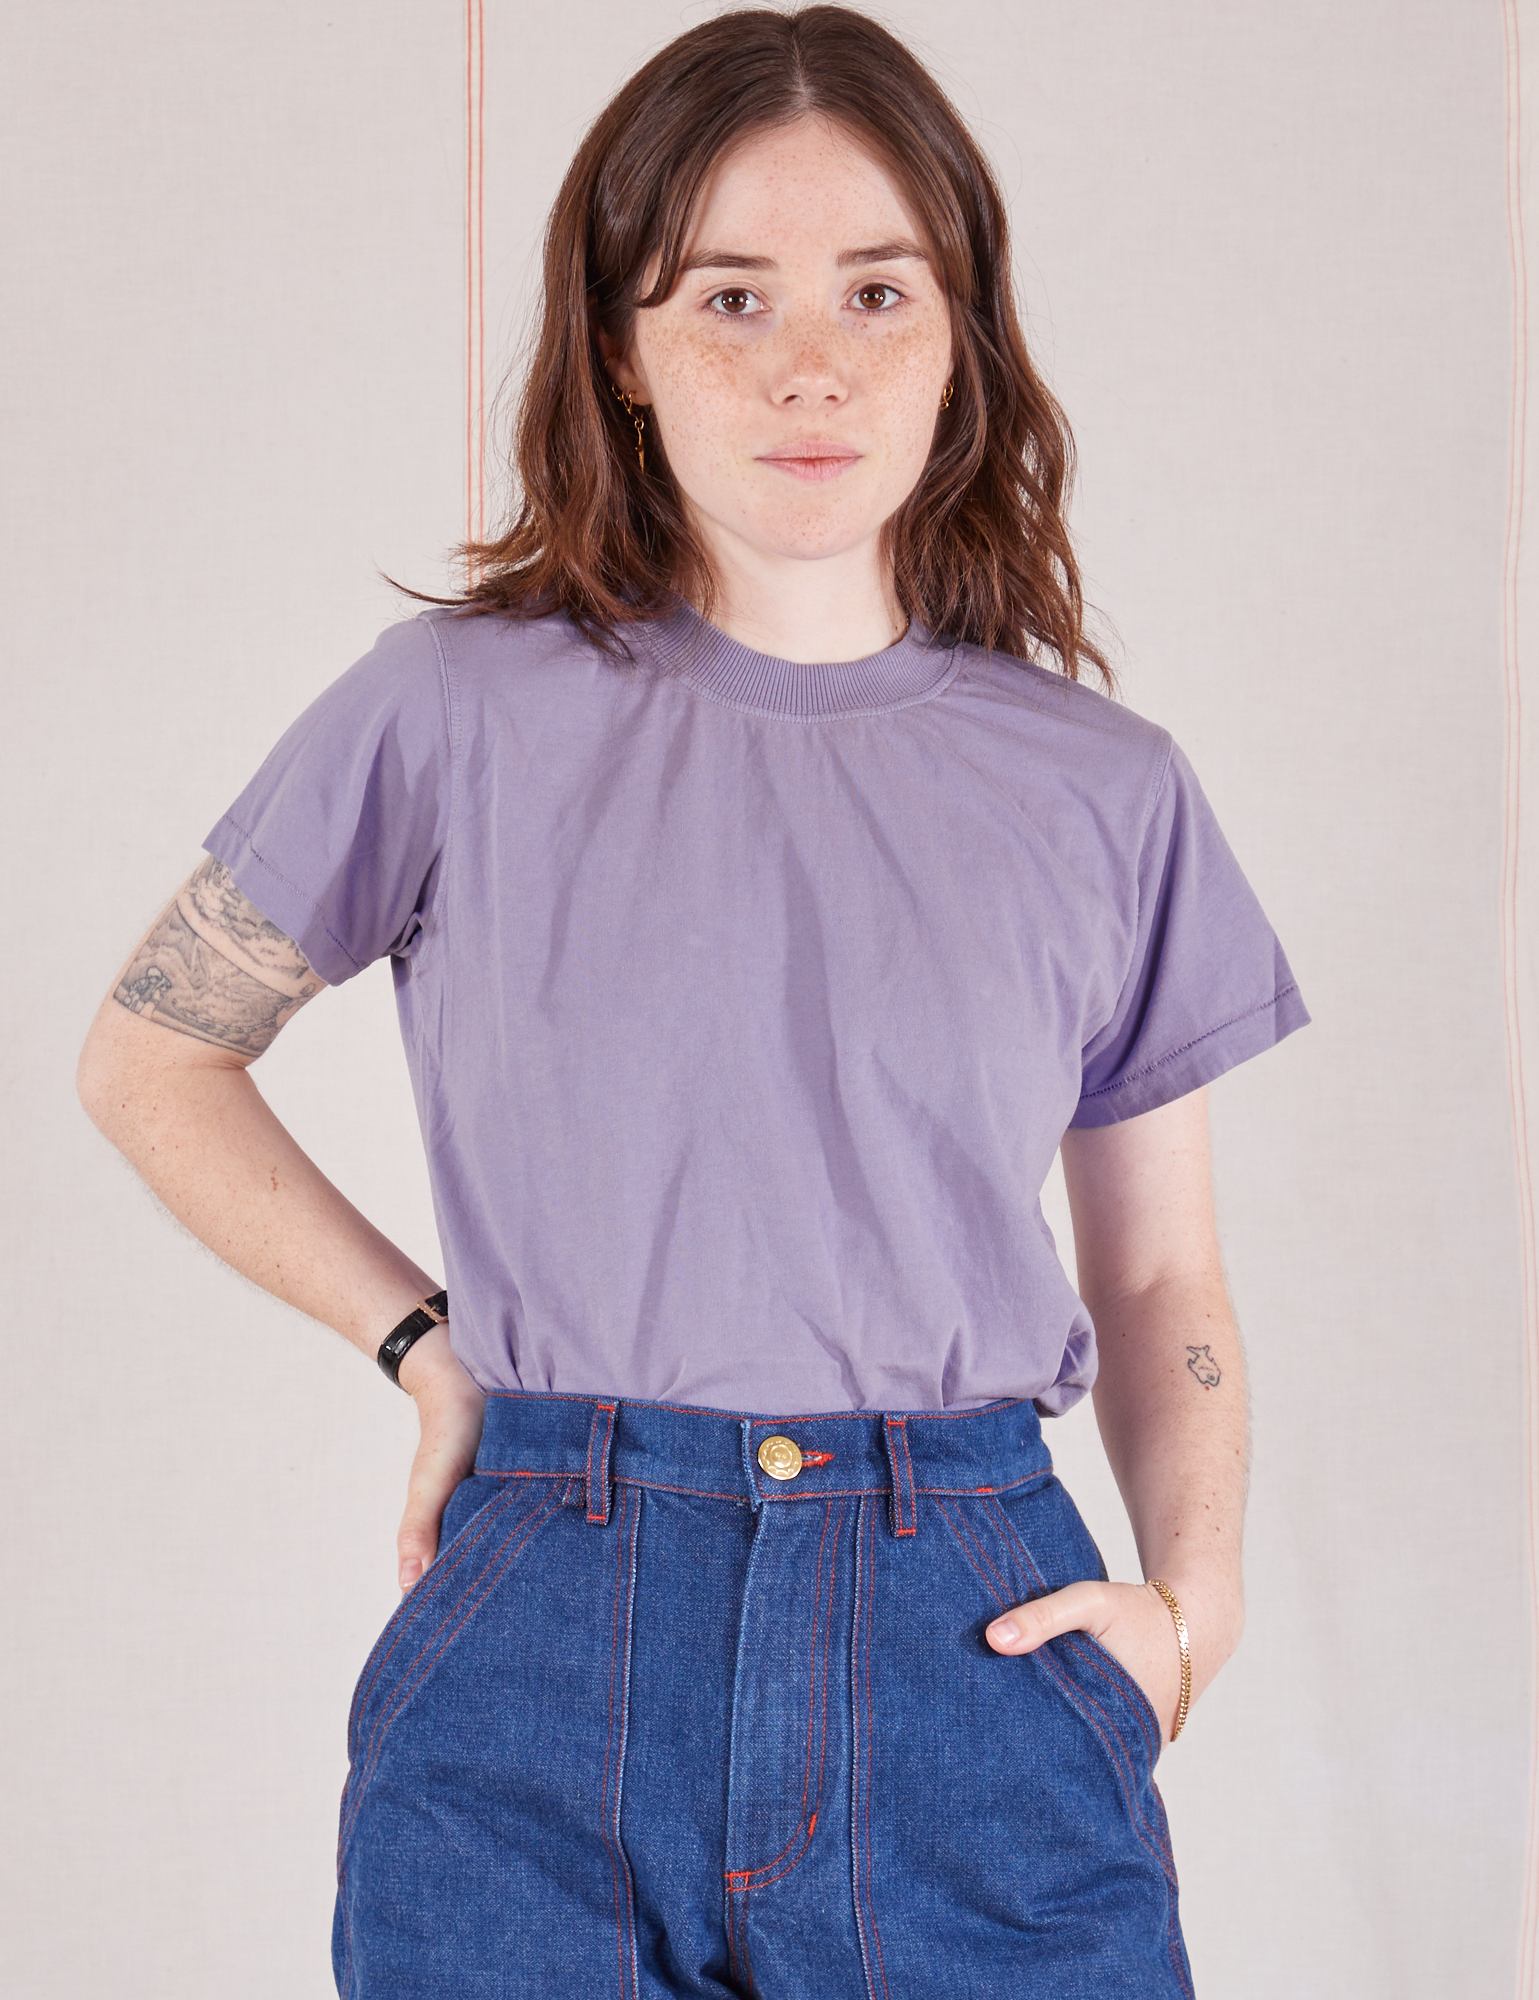 Hana is 5&#39;3&quot; and wearing P Organic Vintage Tee in Faded Grape tucked into dark wash Carpenter Jeans